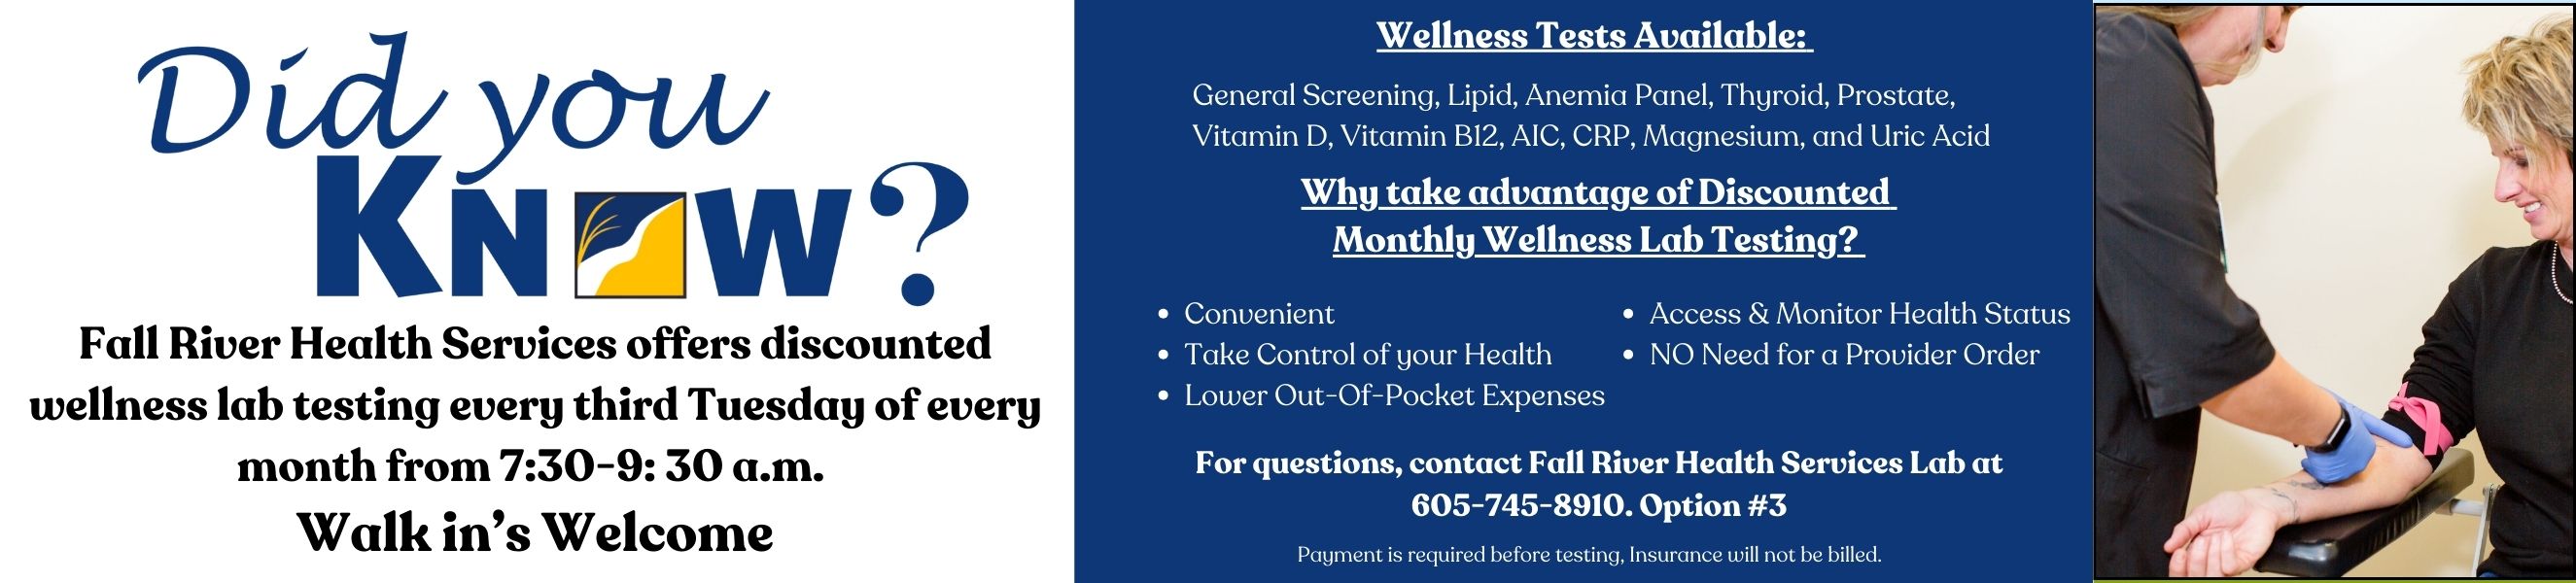 Fall River Health Services offers discounted wellness lab testing every third Tuesday of every month from 7:30-9:30 a.m. Walk in's Welcome. Questions? Call 605-745-8910